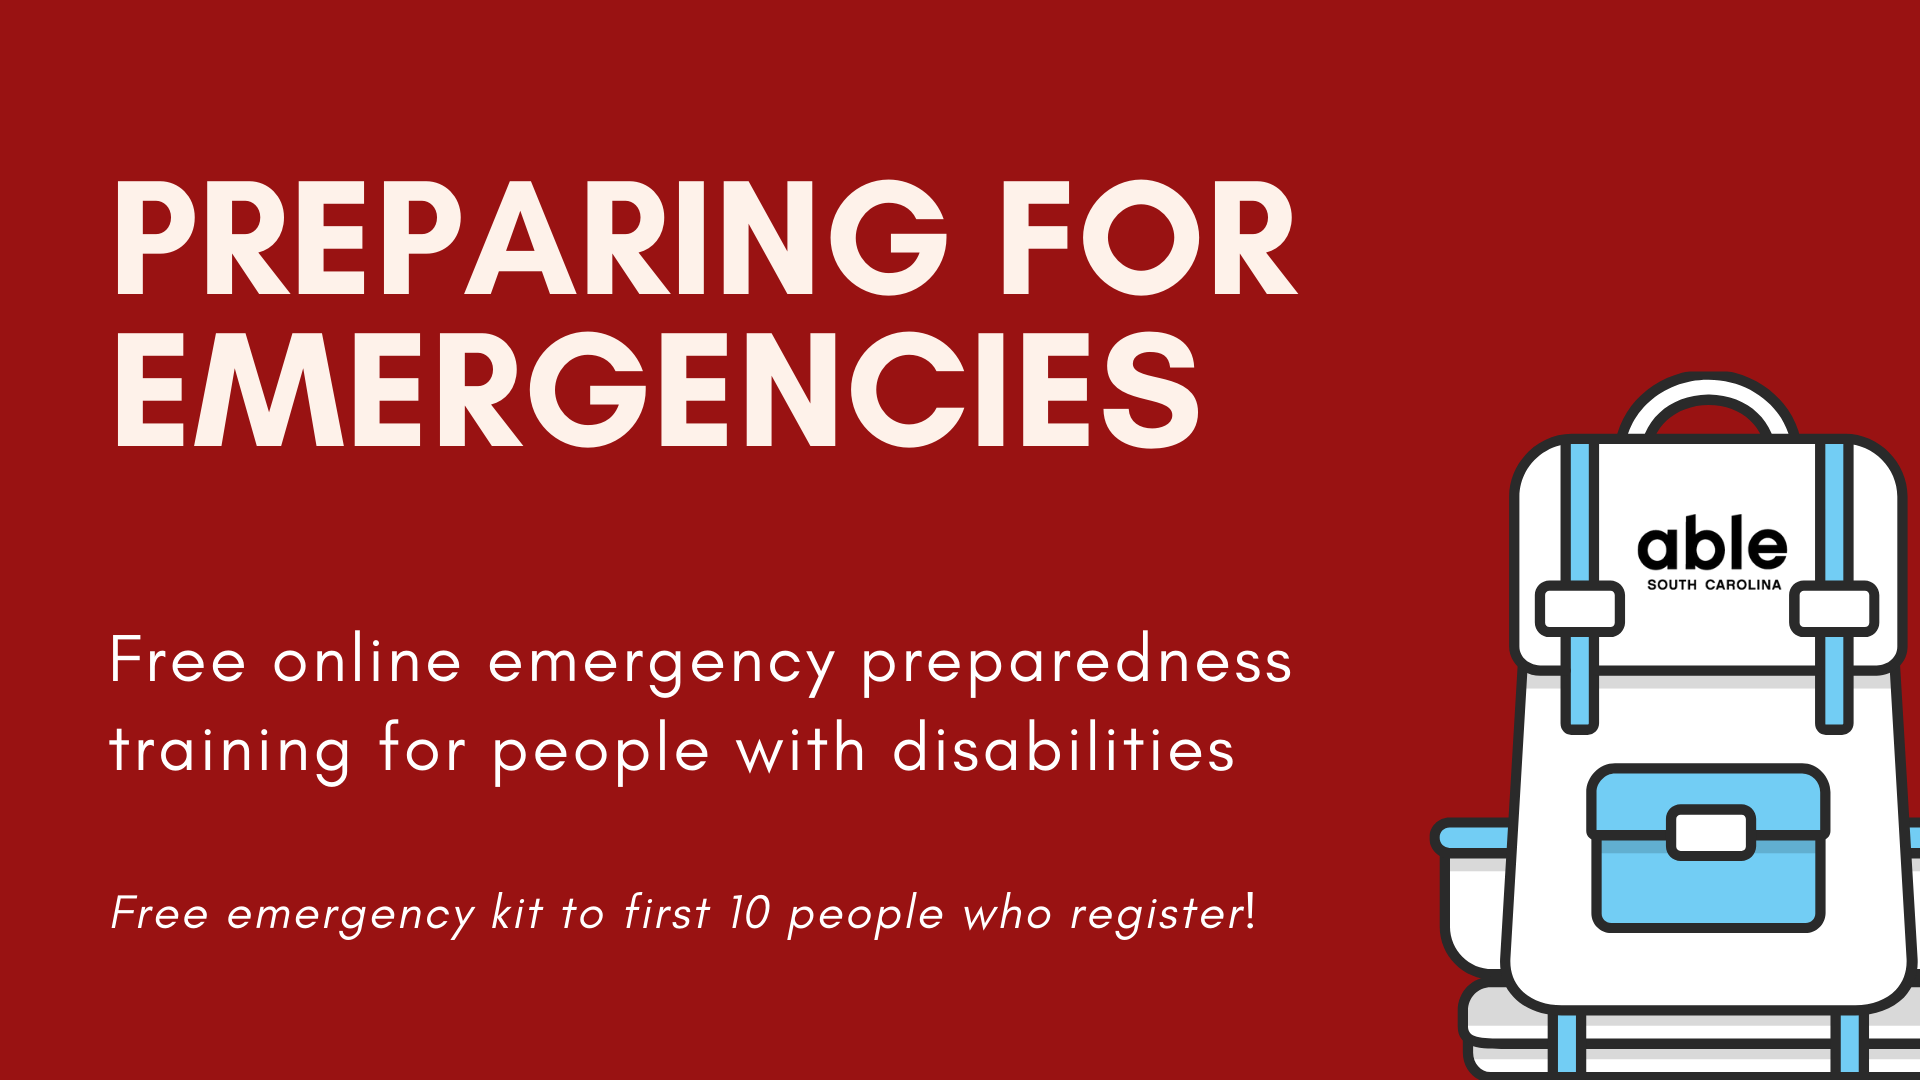 Red background with white text that says: 'Preparing for Emergencies: Free online emergency preparedness training for people with disabilities: Free emergency kit to the first 10 people who register.' On the right is a graphic of a white backpack with the Able SC logo on it.